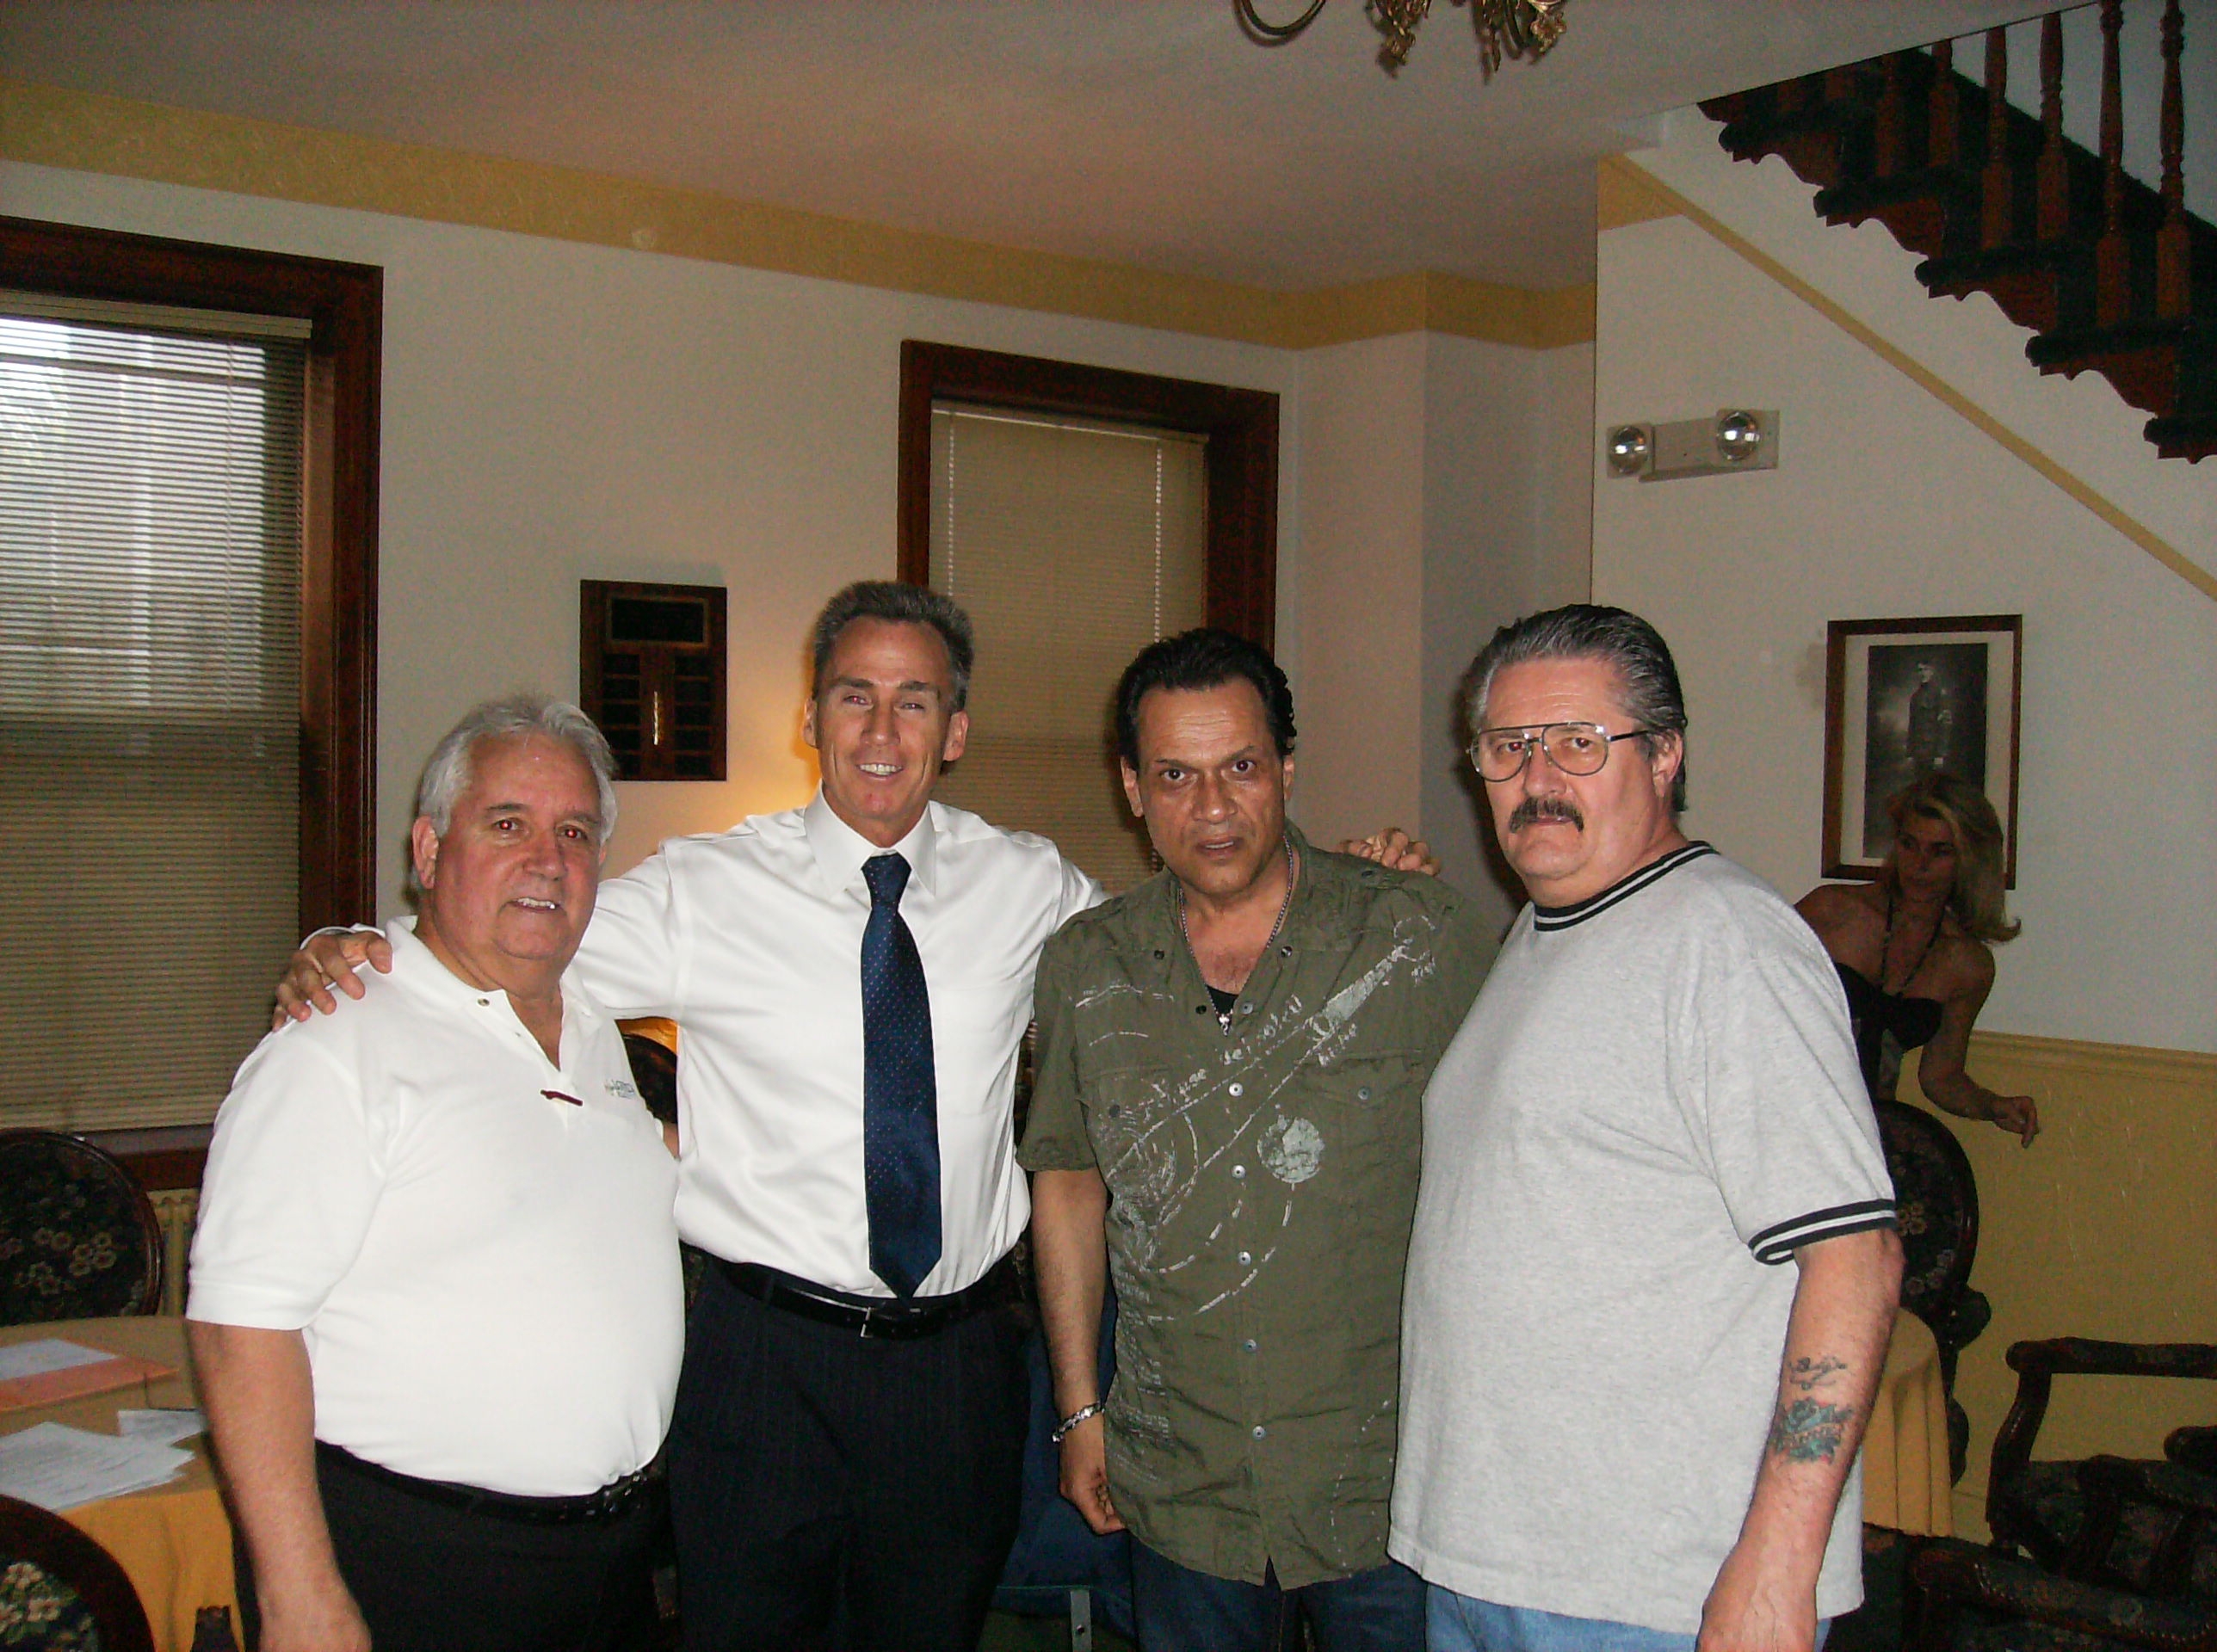 Bill Kelly, Sen. Mike Stack, Rick Borgia and Robert on the set of the TV series 